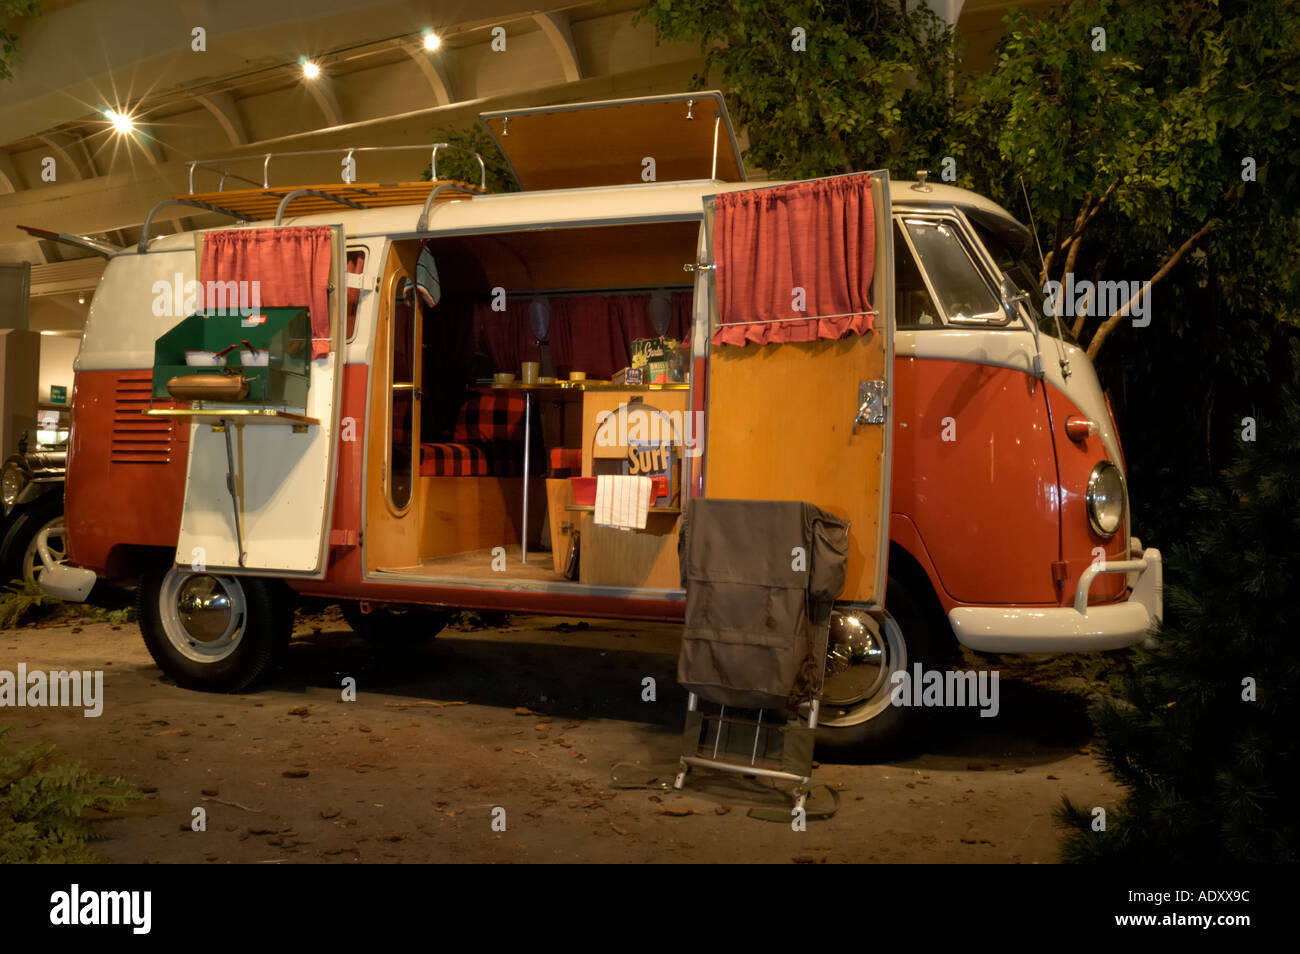 1959 Volkswagen Westfalia Camper on display at the Henry Ford Museum in Dearborn Michigan USA Stock Photo